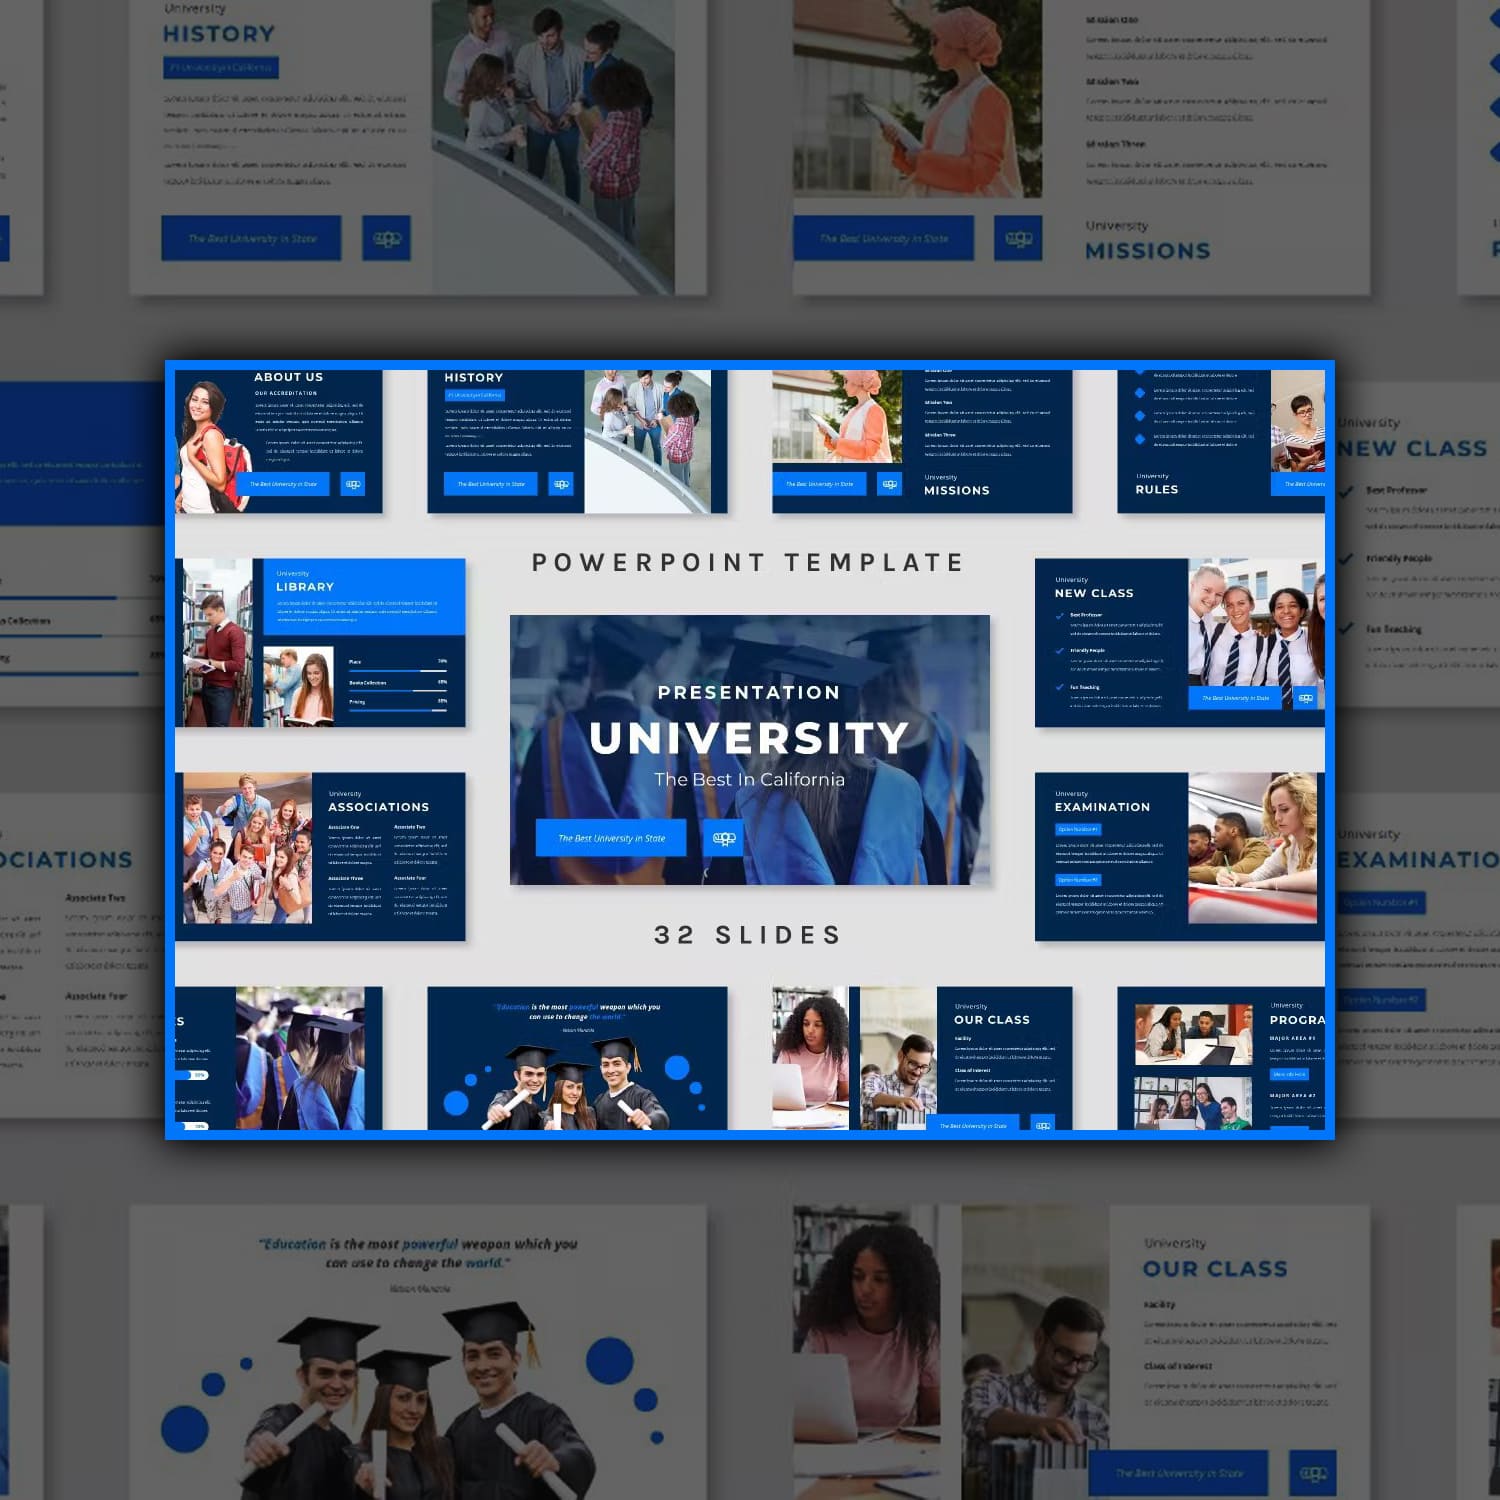 University powerpoint template 2 version, second picture 1500x1500.